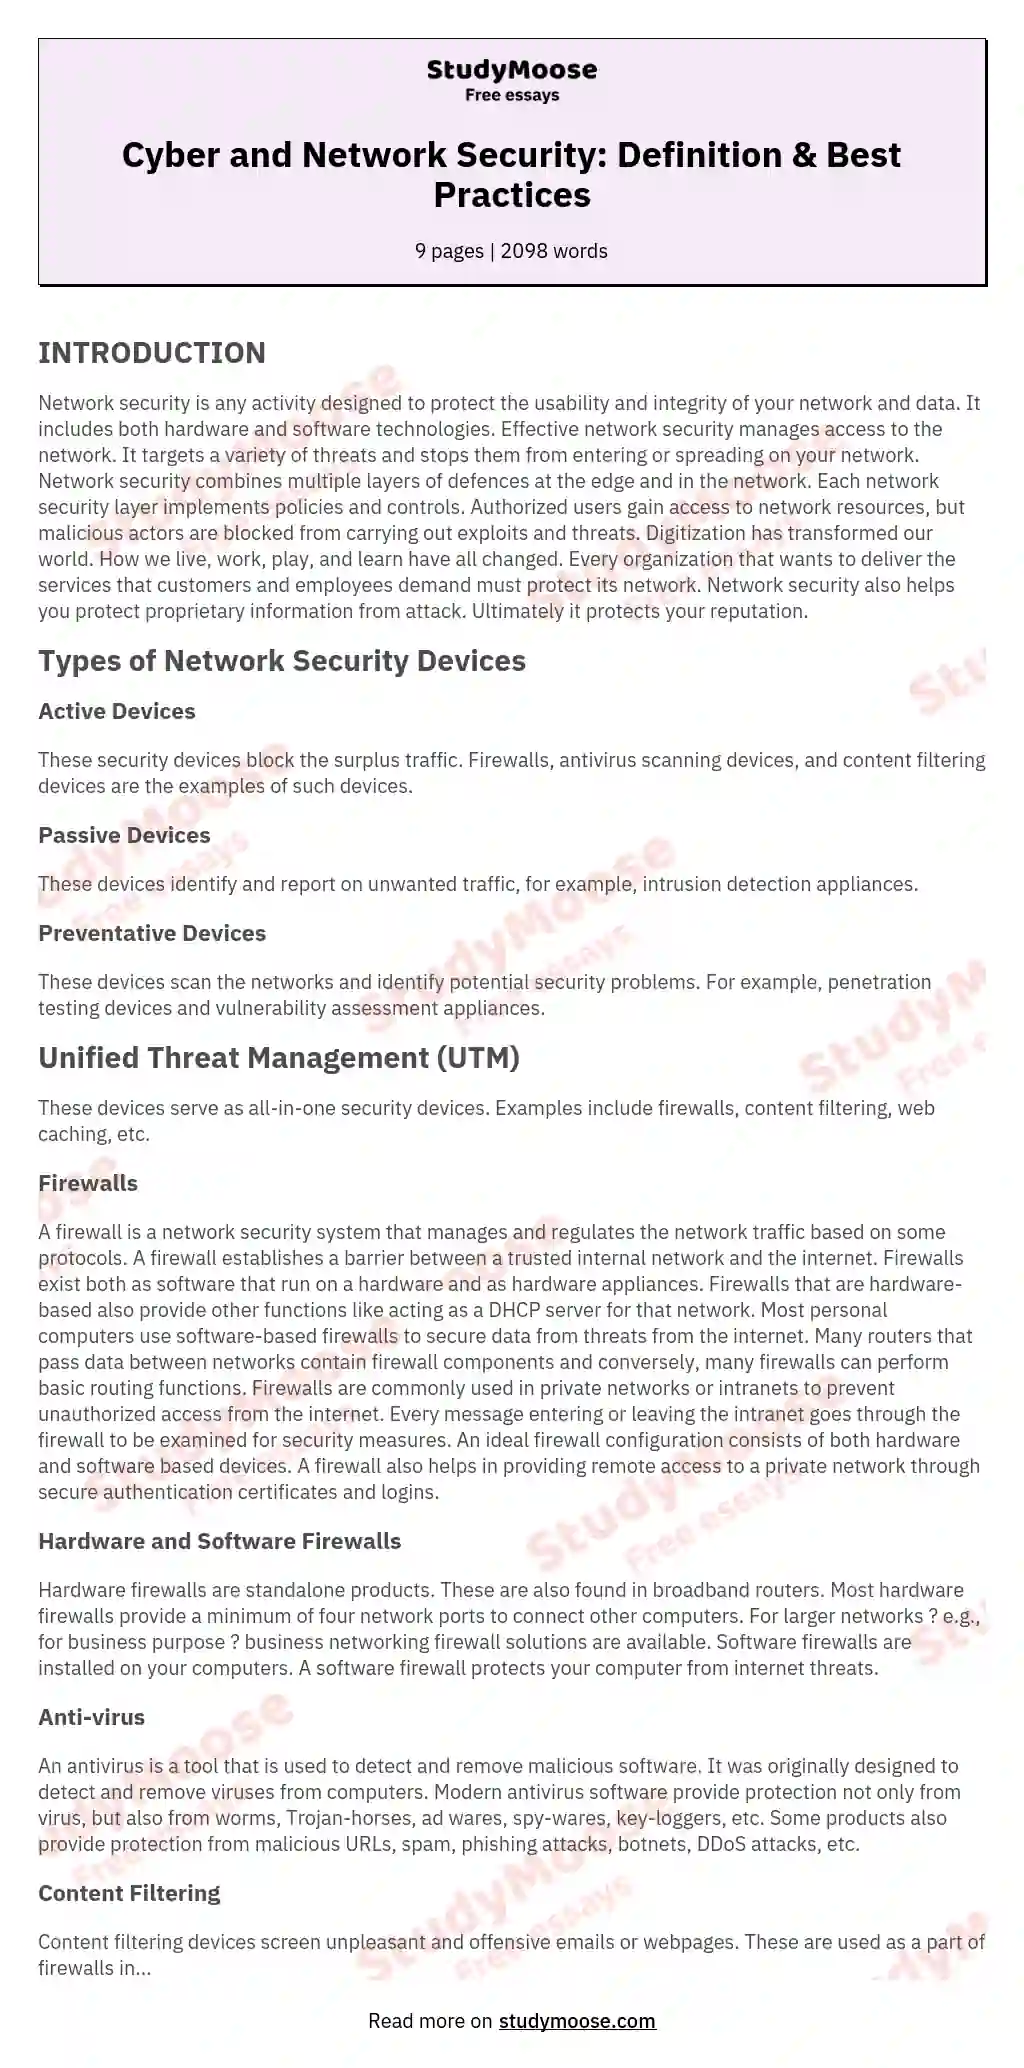 Cyber and Network Security: Definition & Best Practices essay